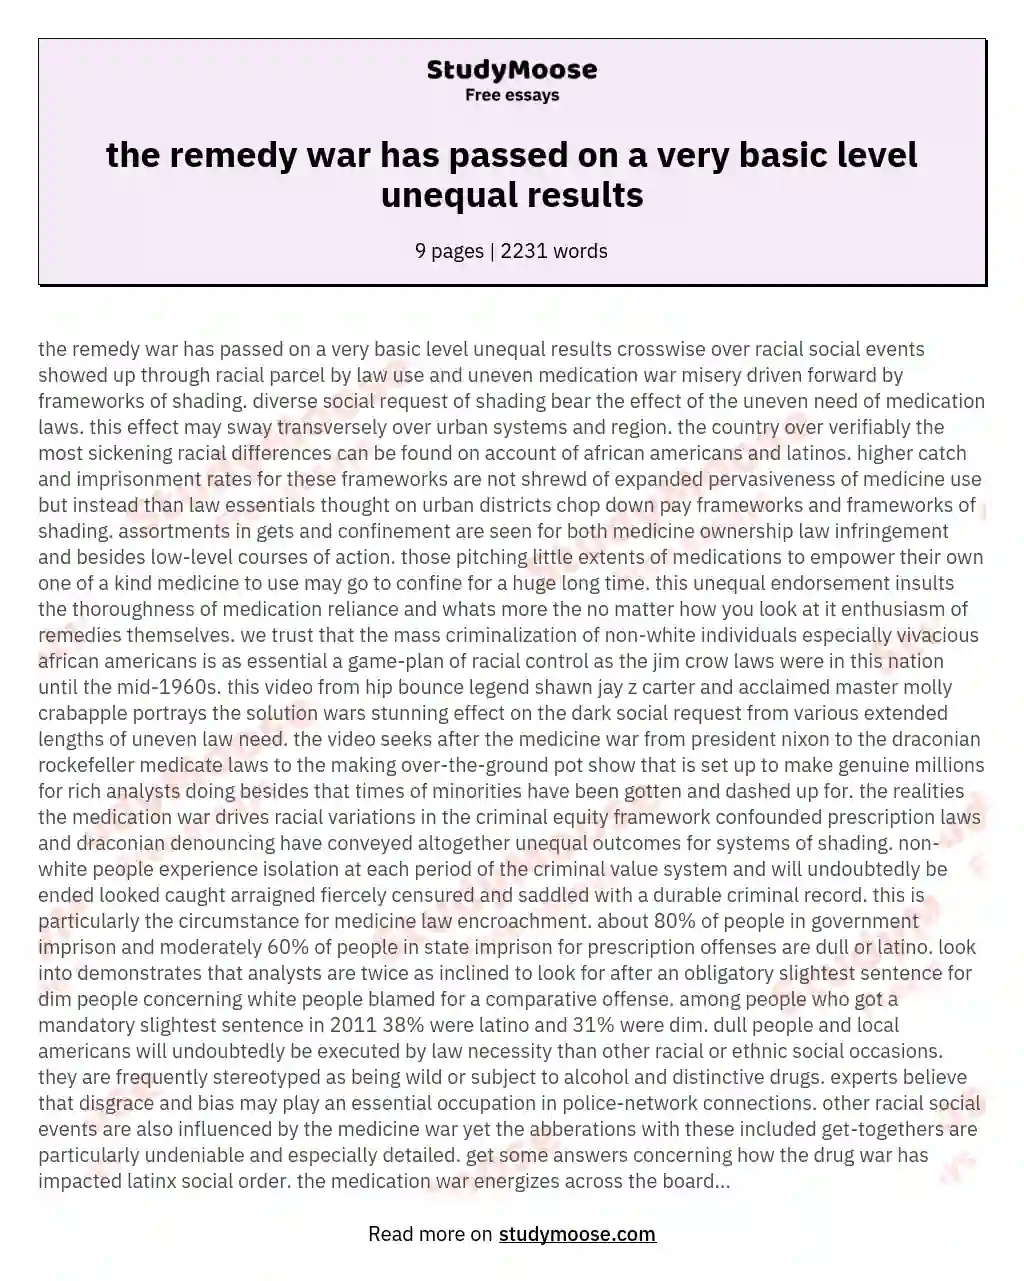 the remedy war has passed on a very basic level unequal results essay